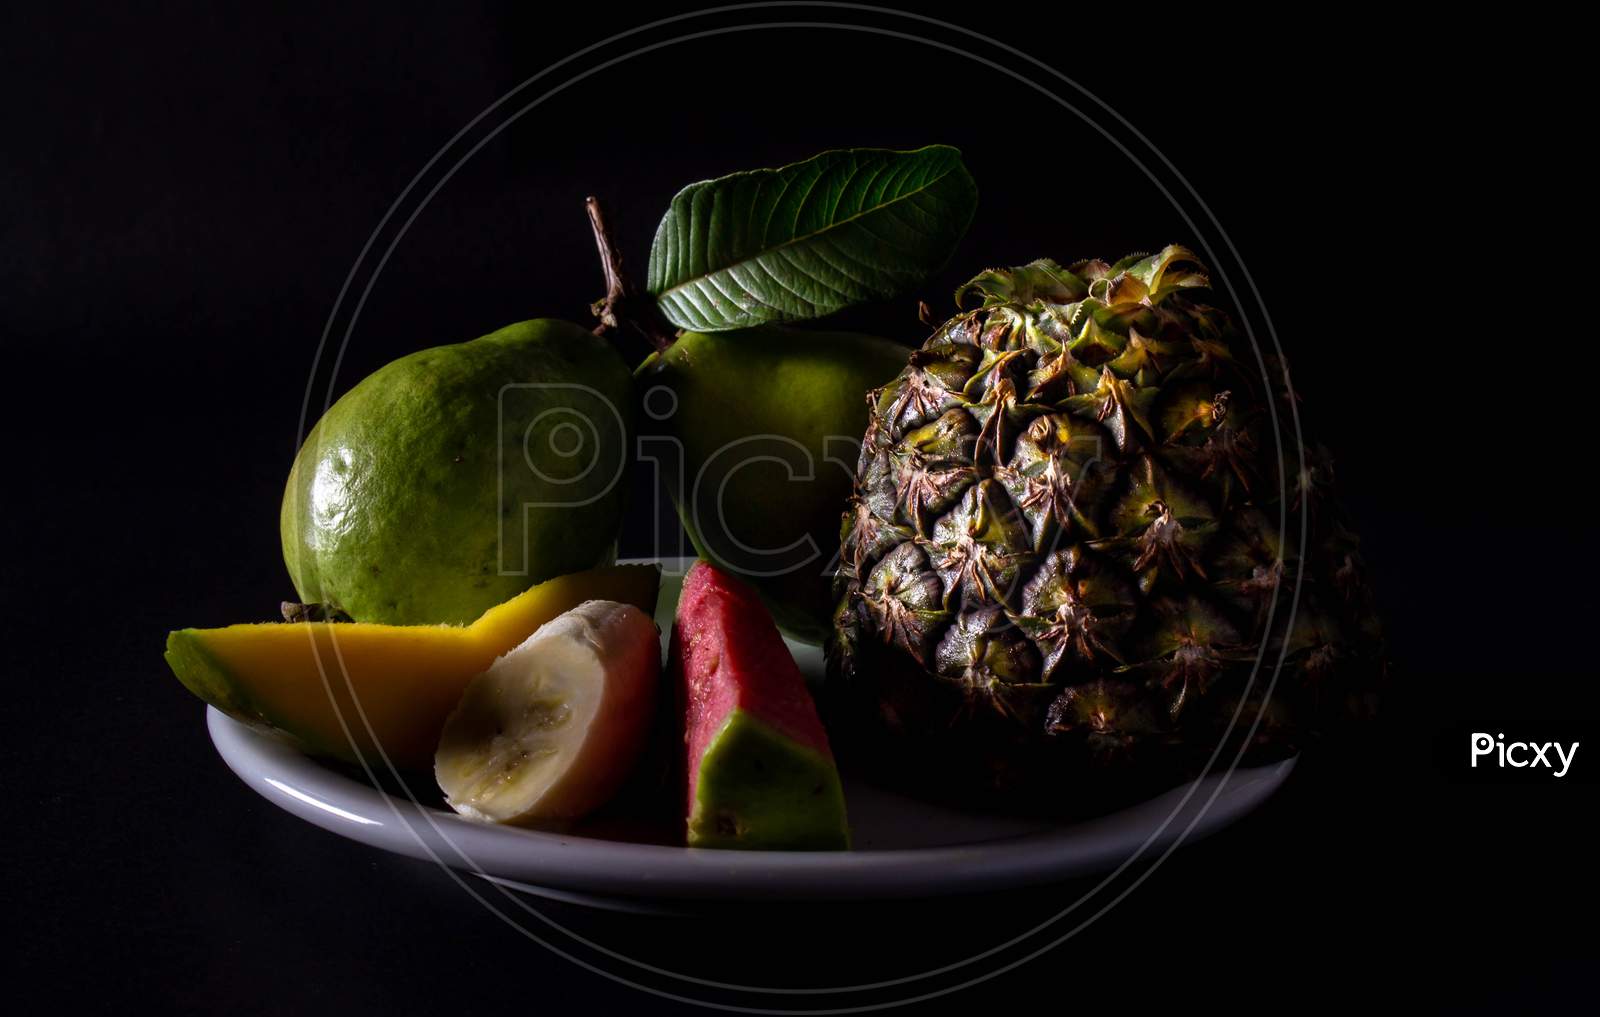 Whole And Cut Varied Fruits On A Plate. Neutral Black Background With Pictorial Lighting. Vegetarian Or Vegan Breakfast Concept.